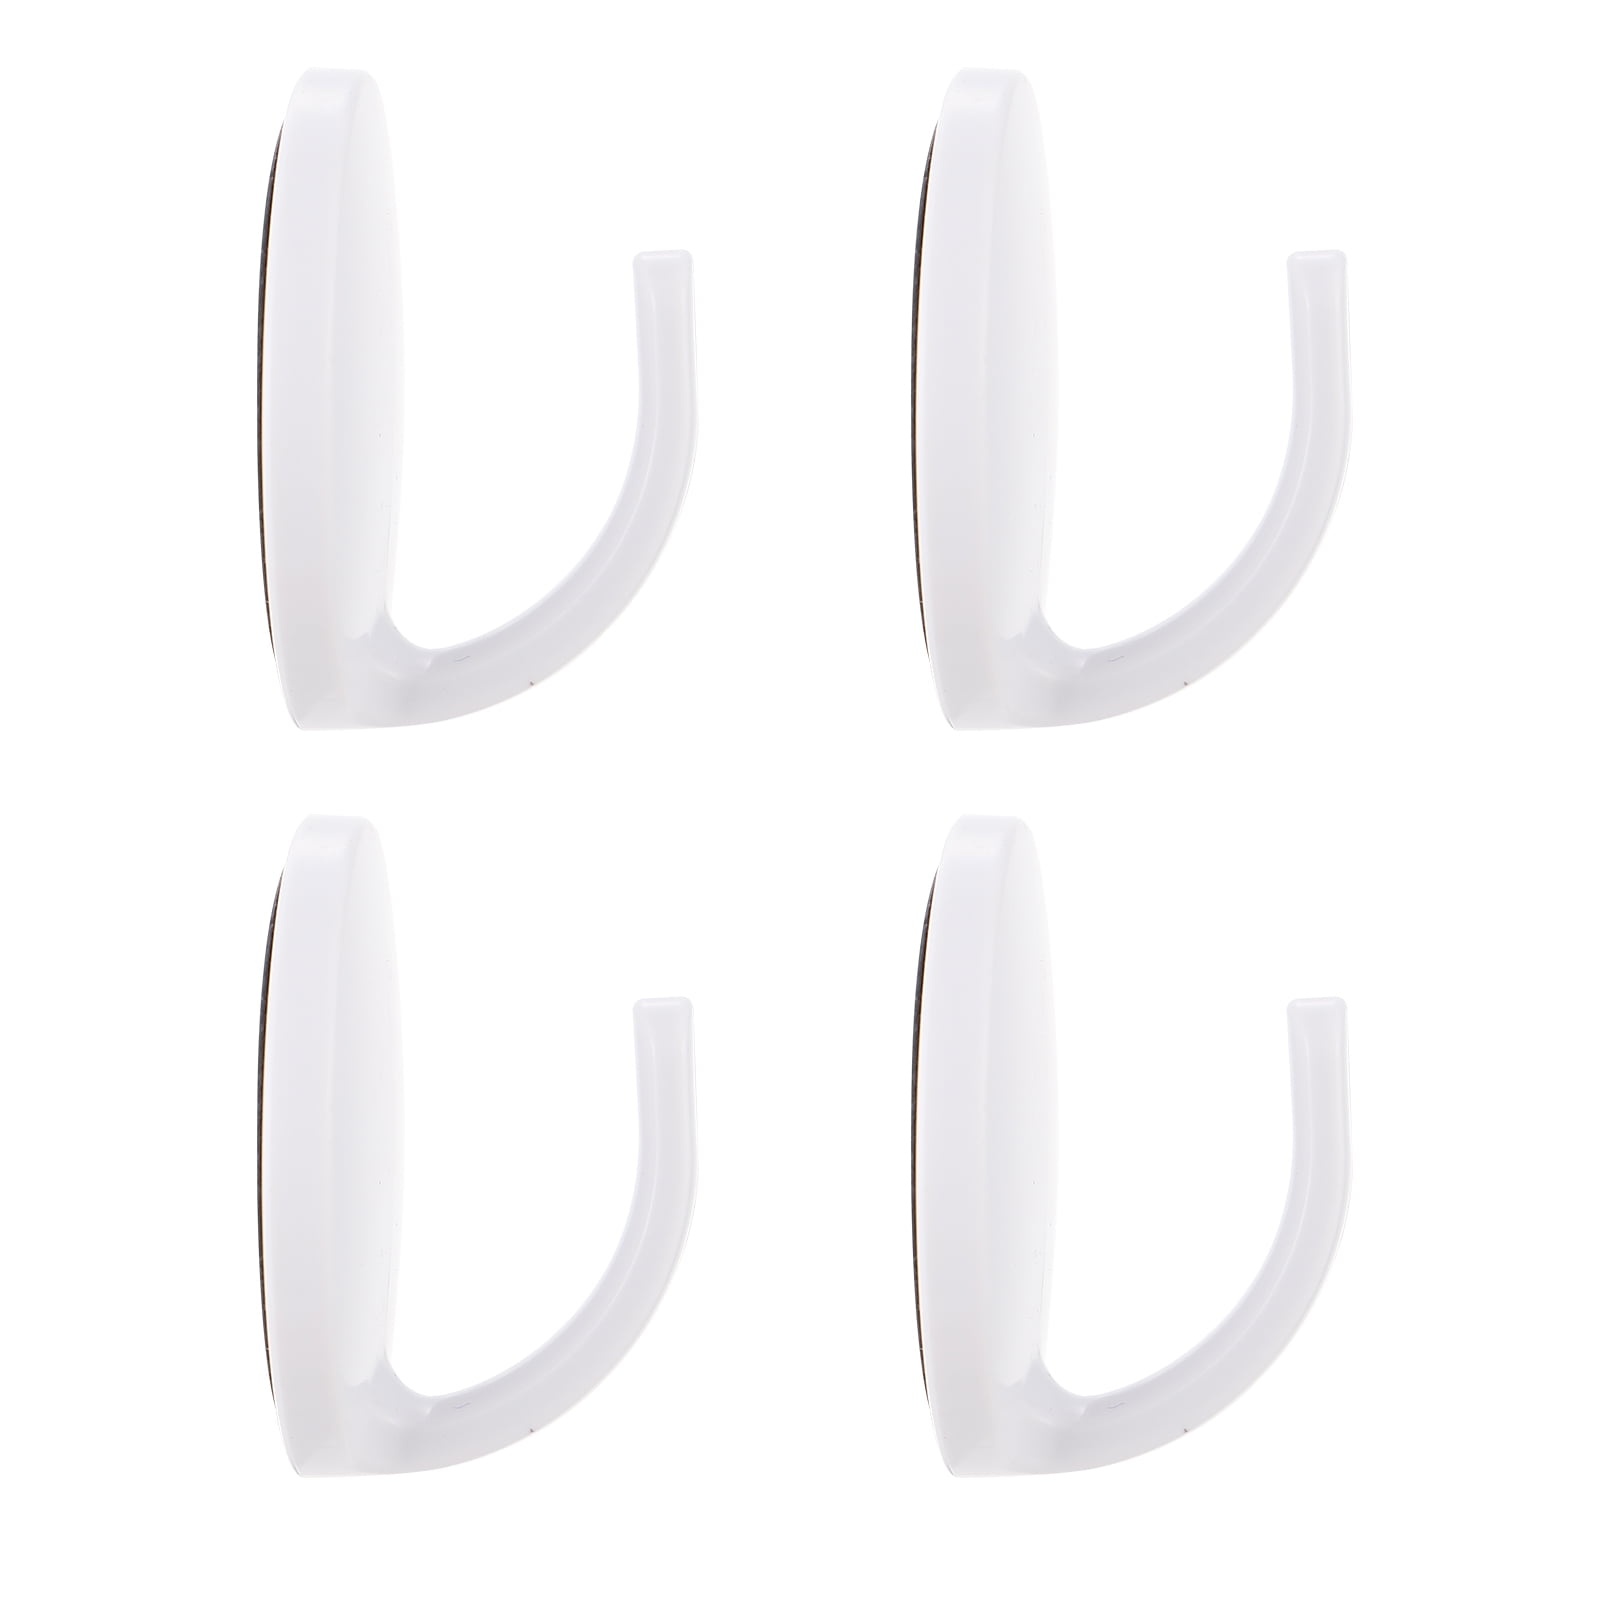 Strong Magnetic Hooks Magnet Heavy Duty for Hanging Cruise Cabins  Refrigerator Classroom Whiteboard Small Magnetic Key Holder Home Wreath  Hanger Coat